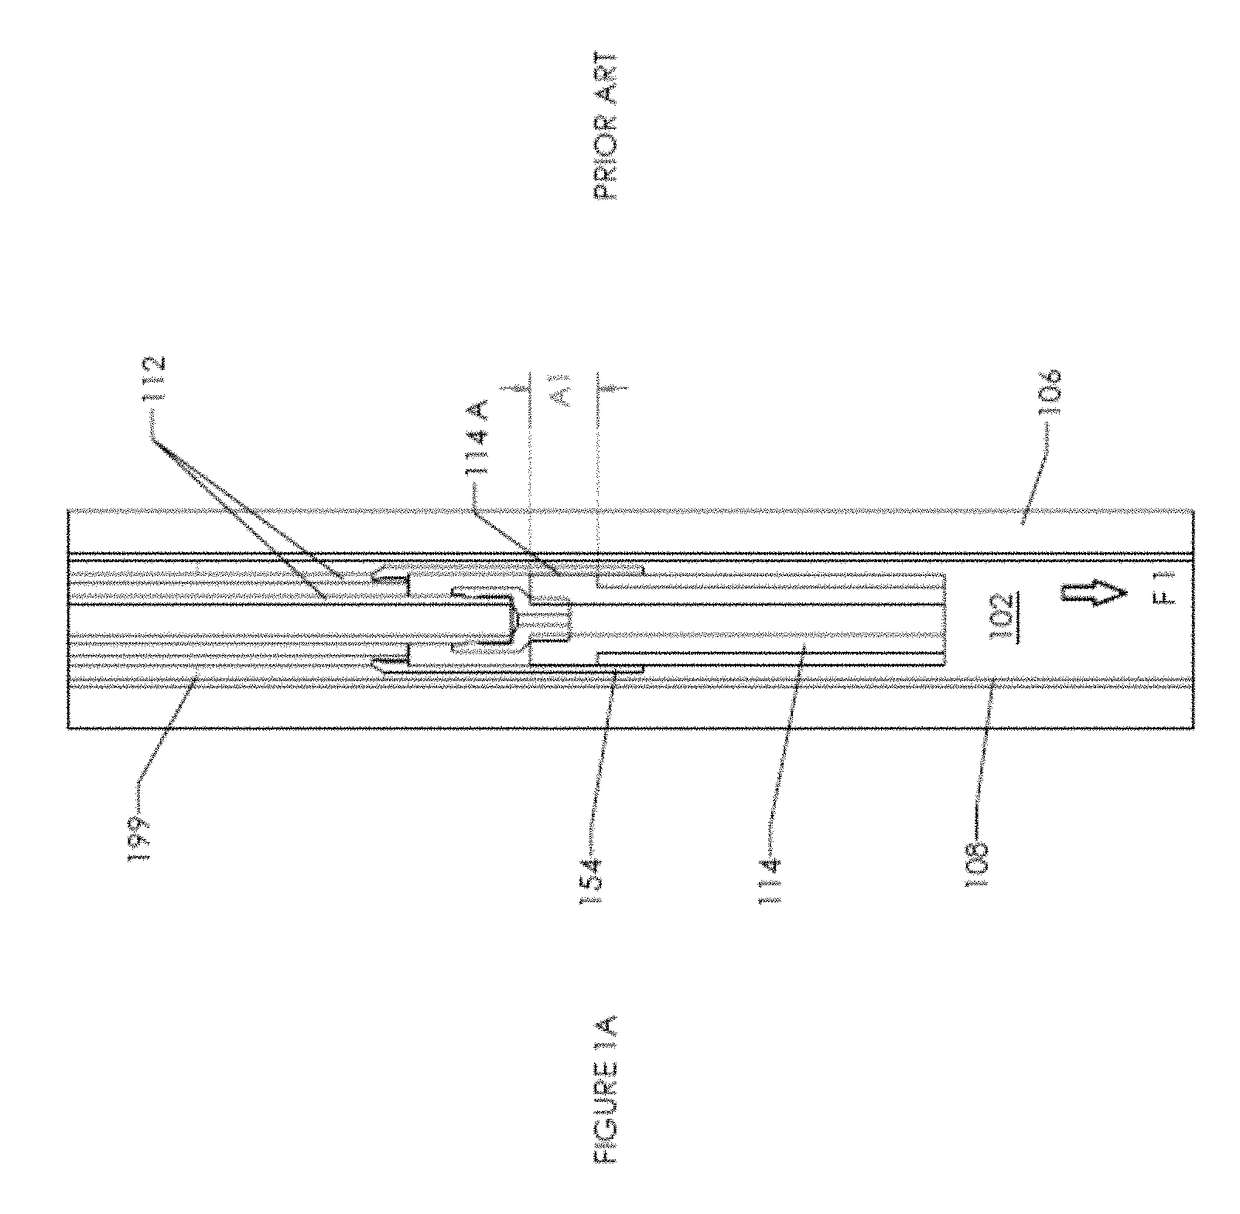 Downhole system for isolating sections of a wellbore